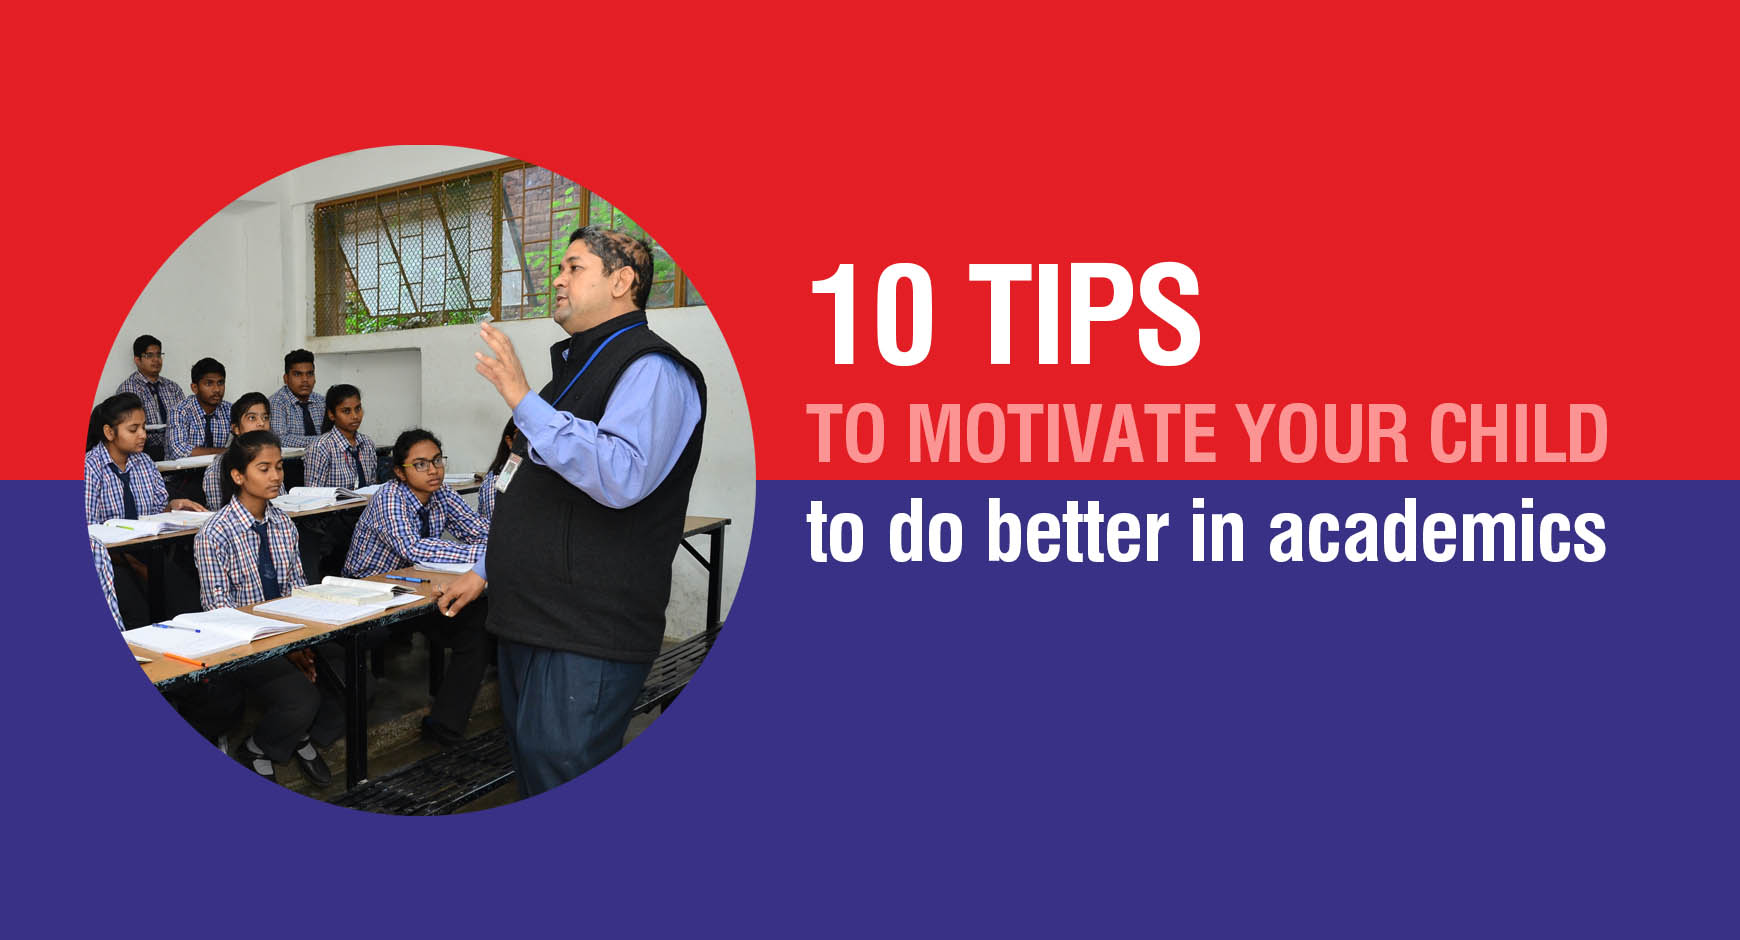 10 tips to motivate your child to do better in academics